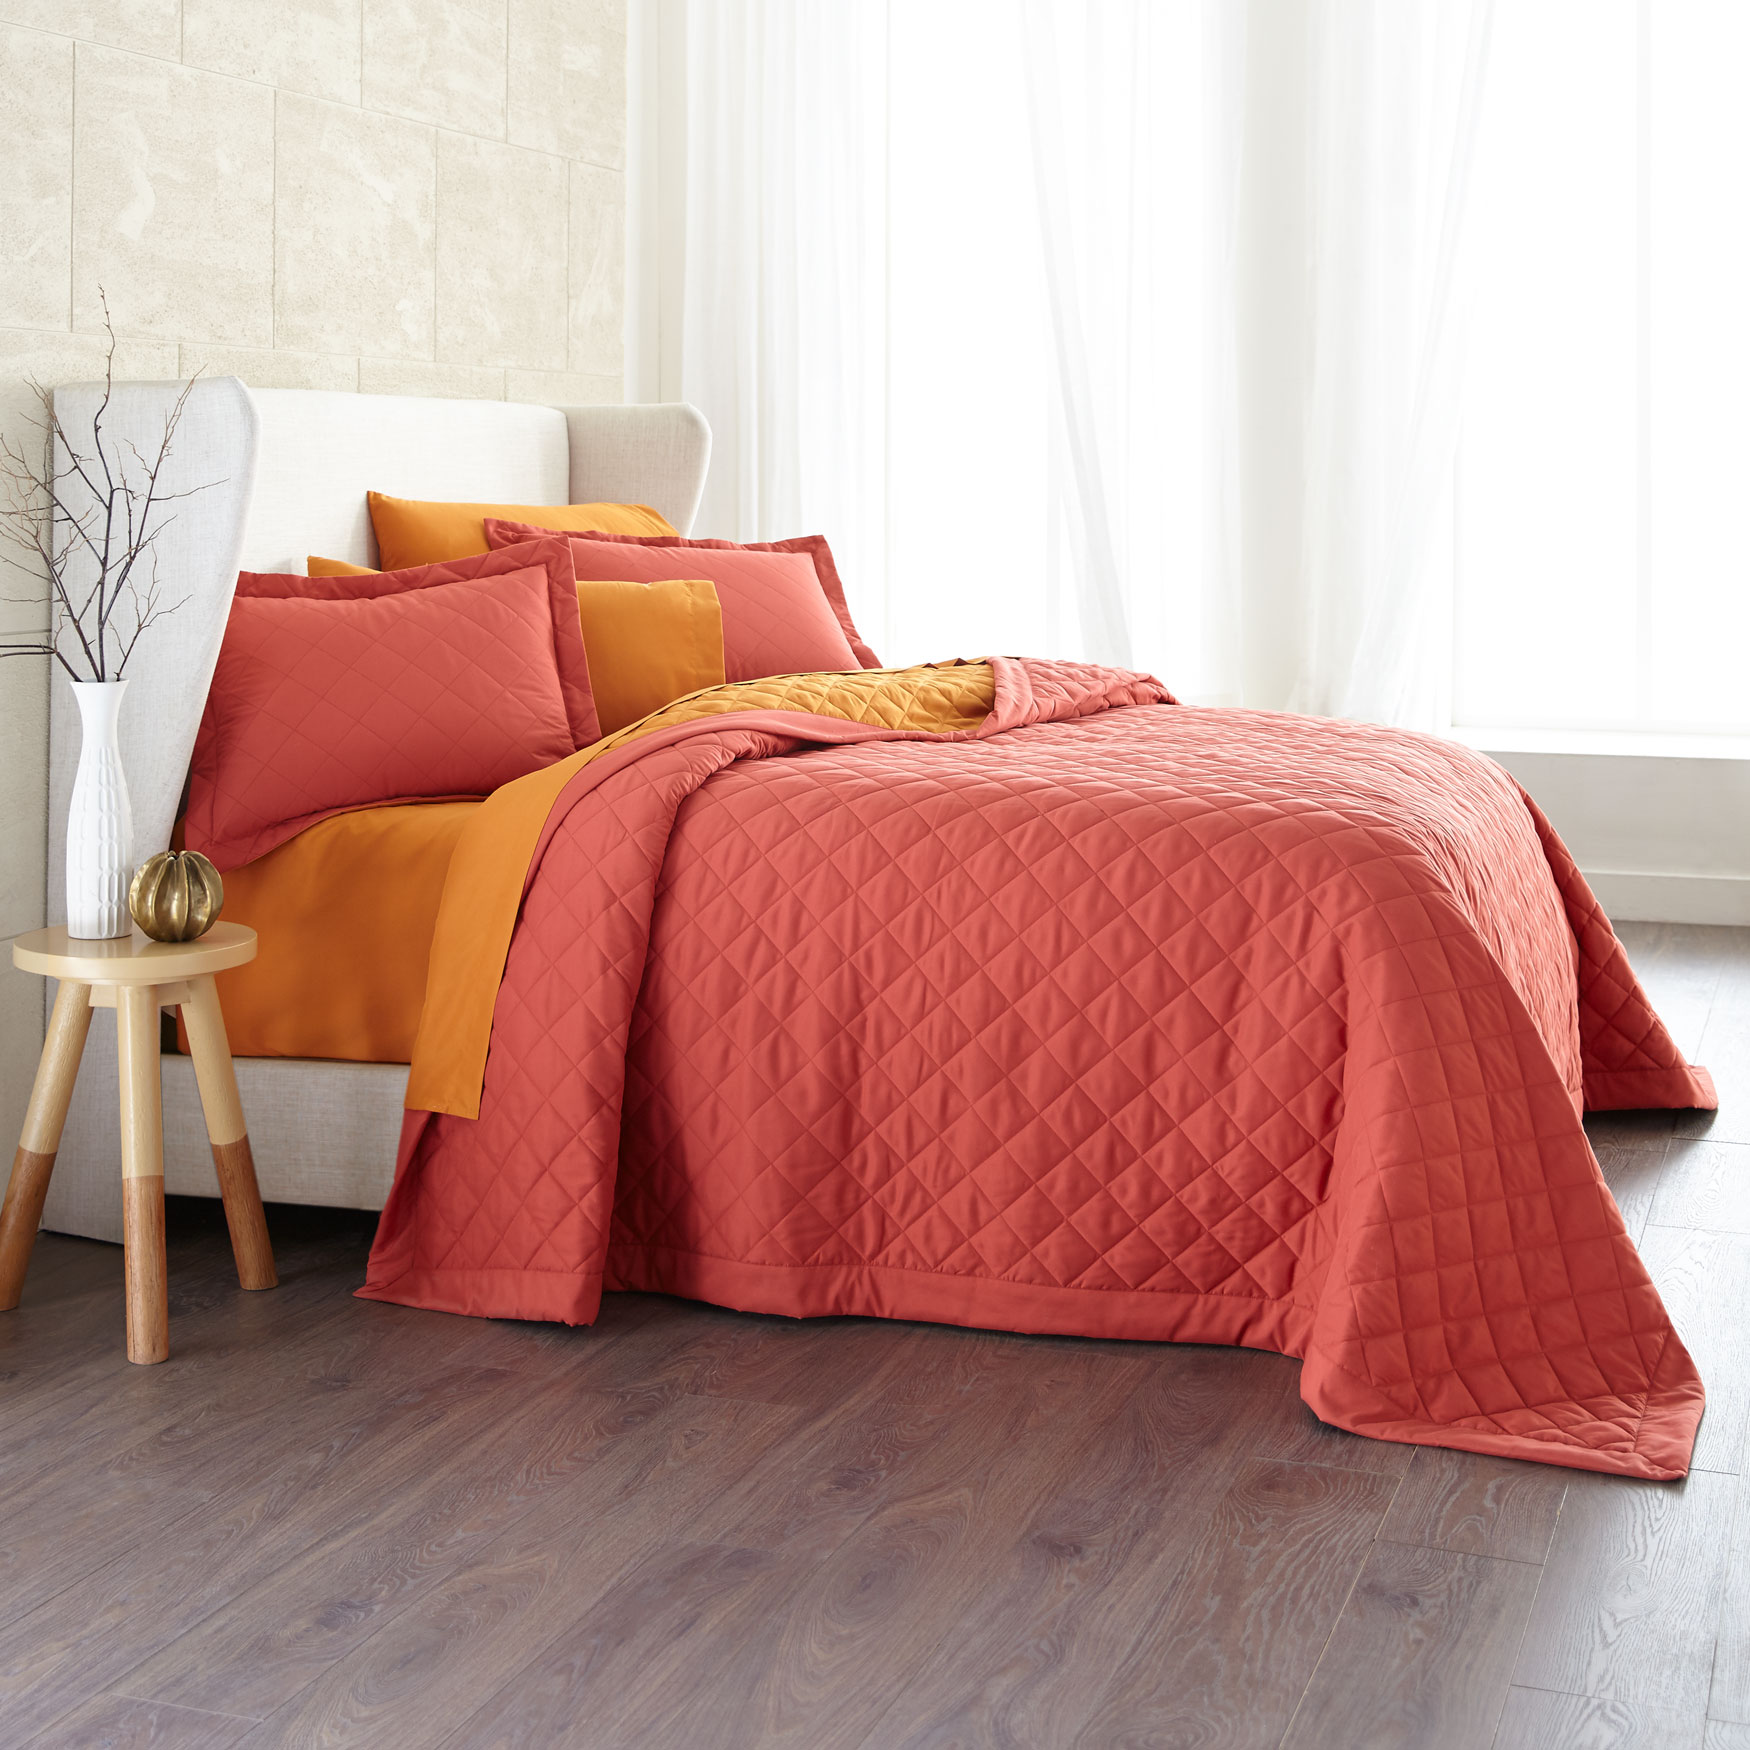 BrylaneHome BH Studio Reversible Quilted Bedspread Dark Gray Coral Twin